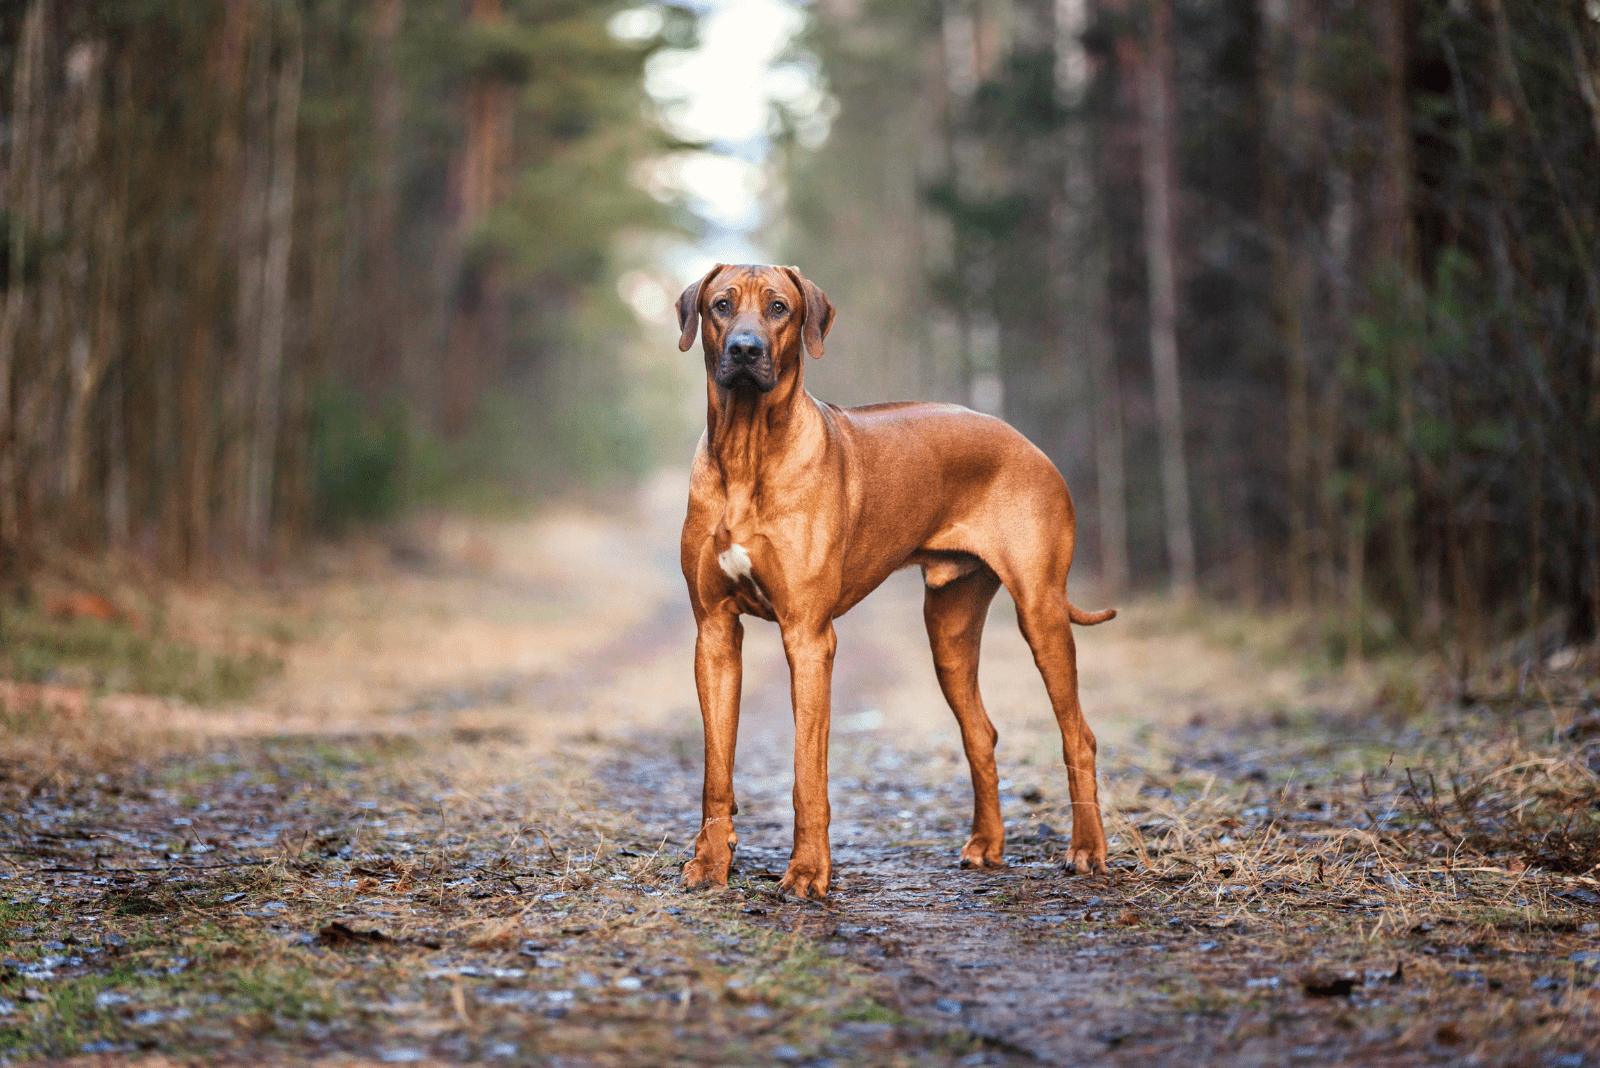 Rhodesian Ridgeback standing in the forest